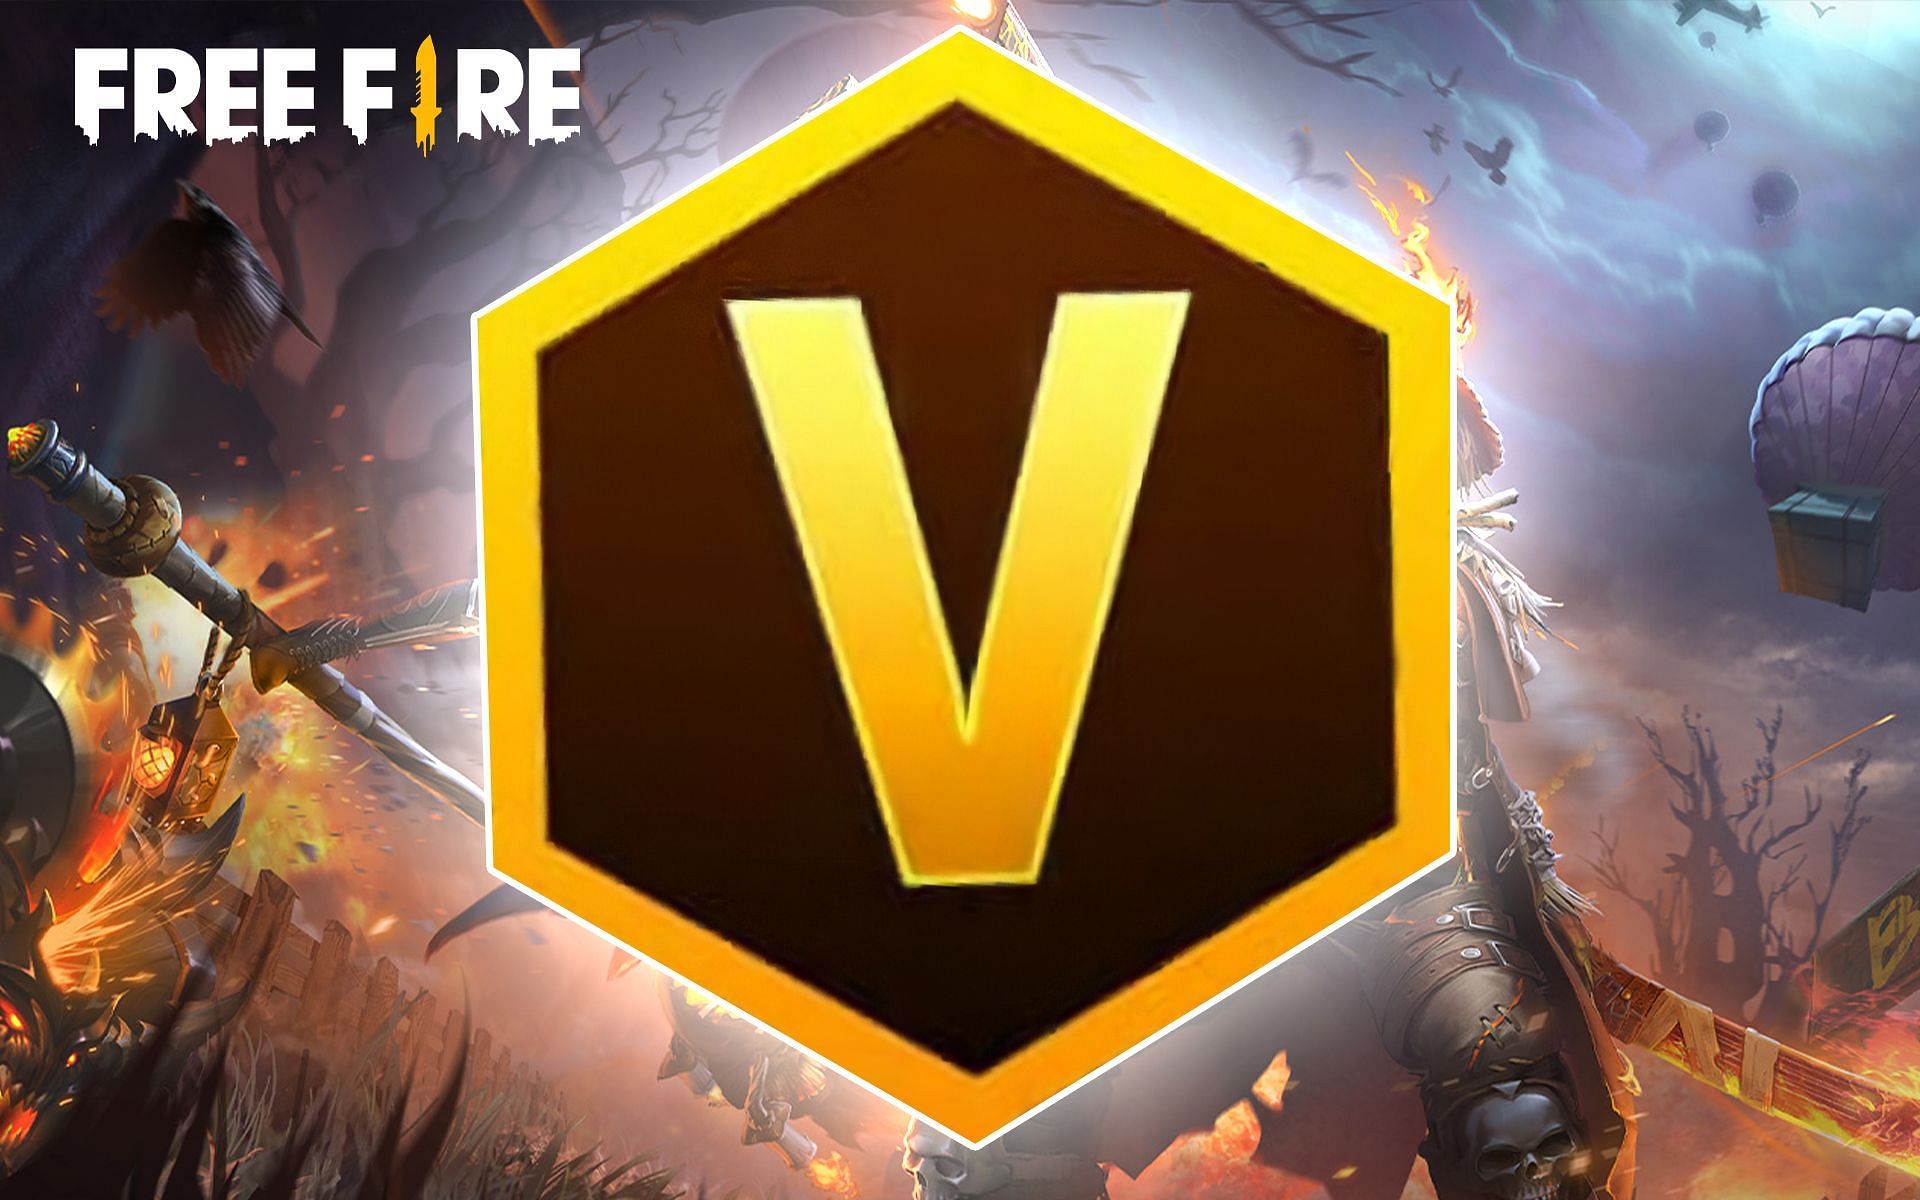 V Badge is rare due to the difficulty in joining it (Image via Free Fire)